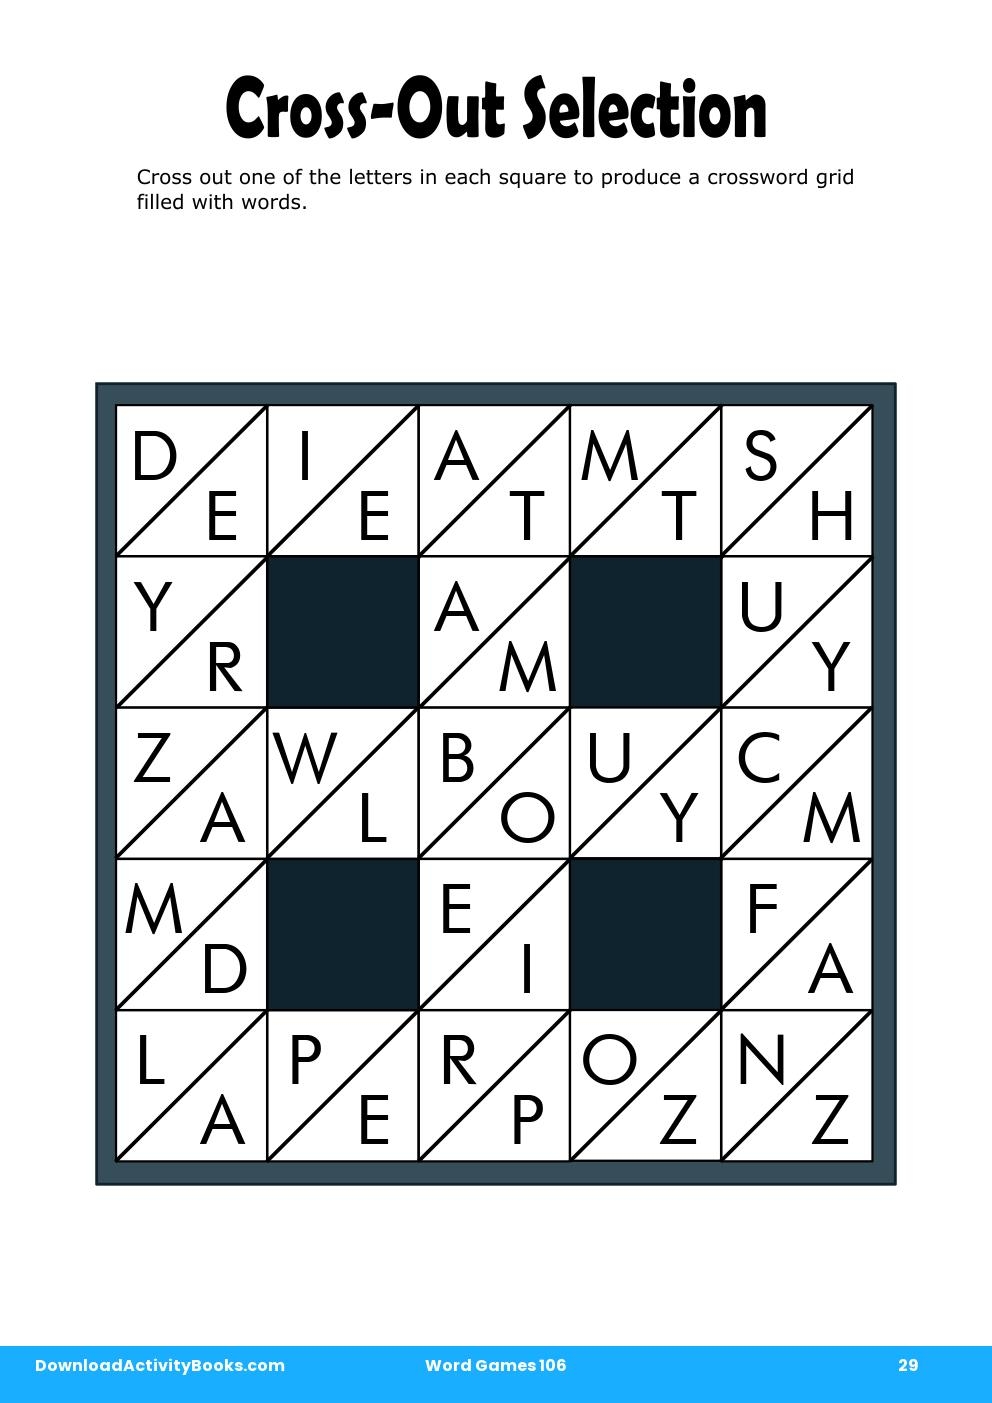 Cross-Out Selection in Word Games 106